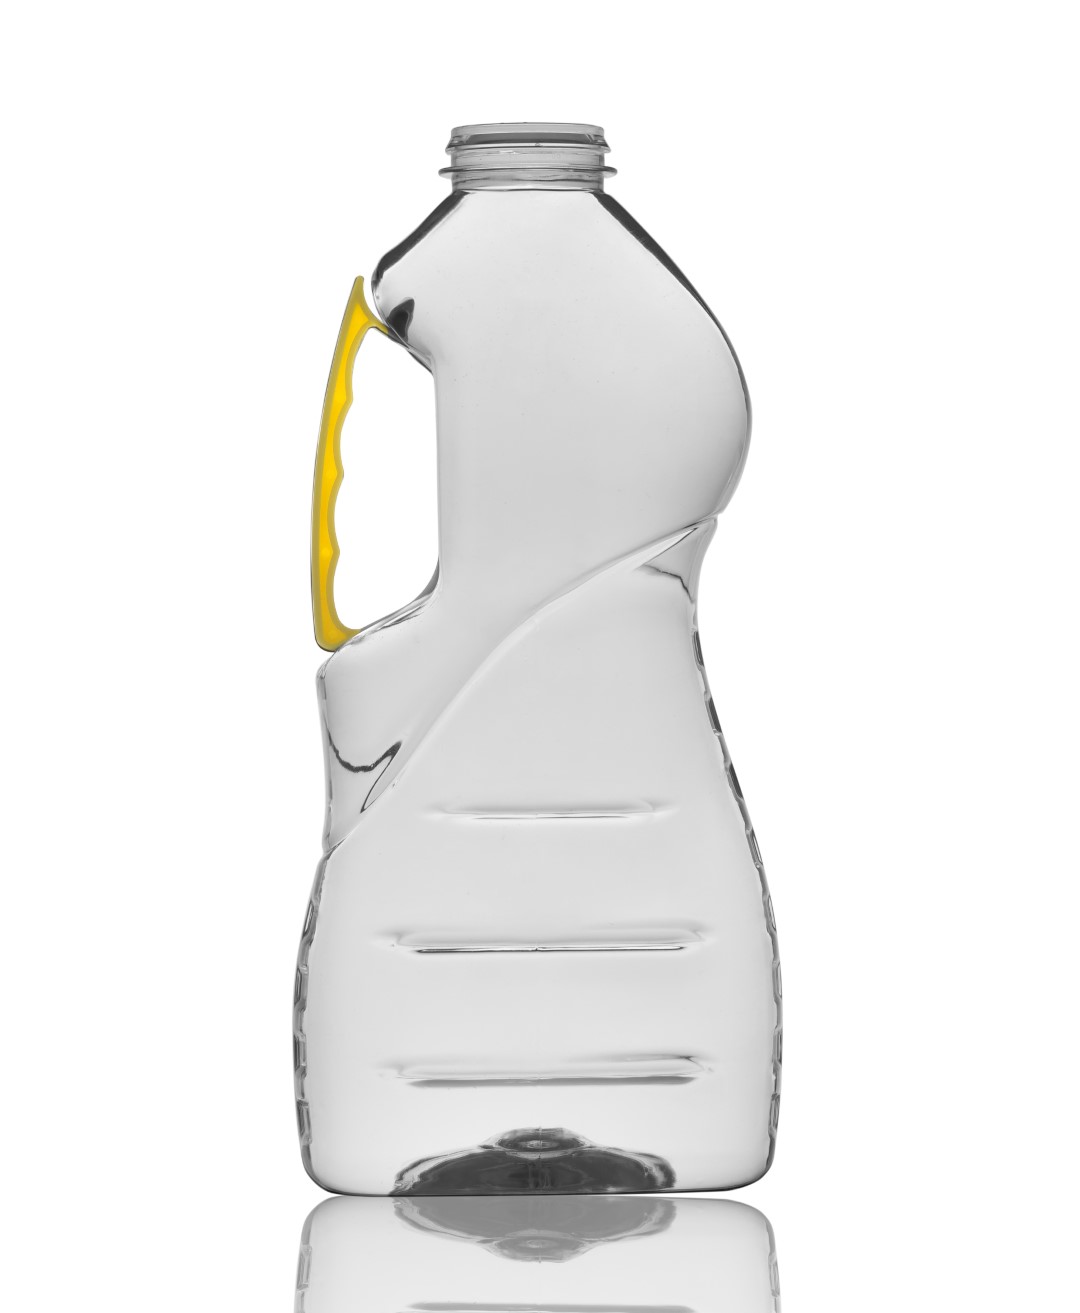 44 mm 1,6 L BOTTLE WITH HANDLE